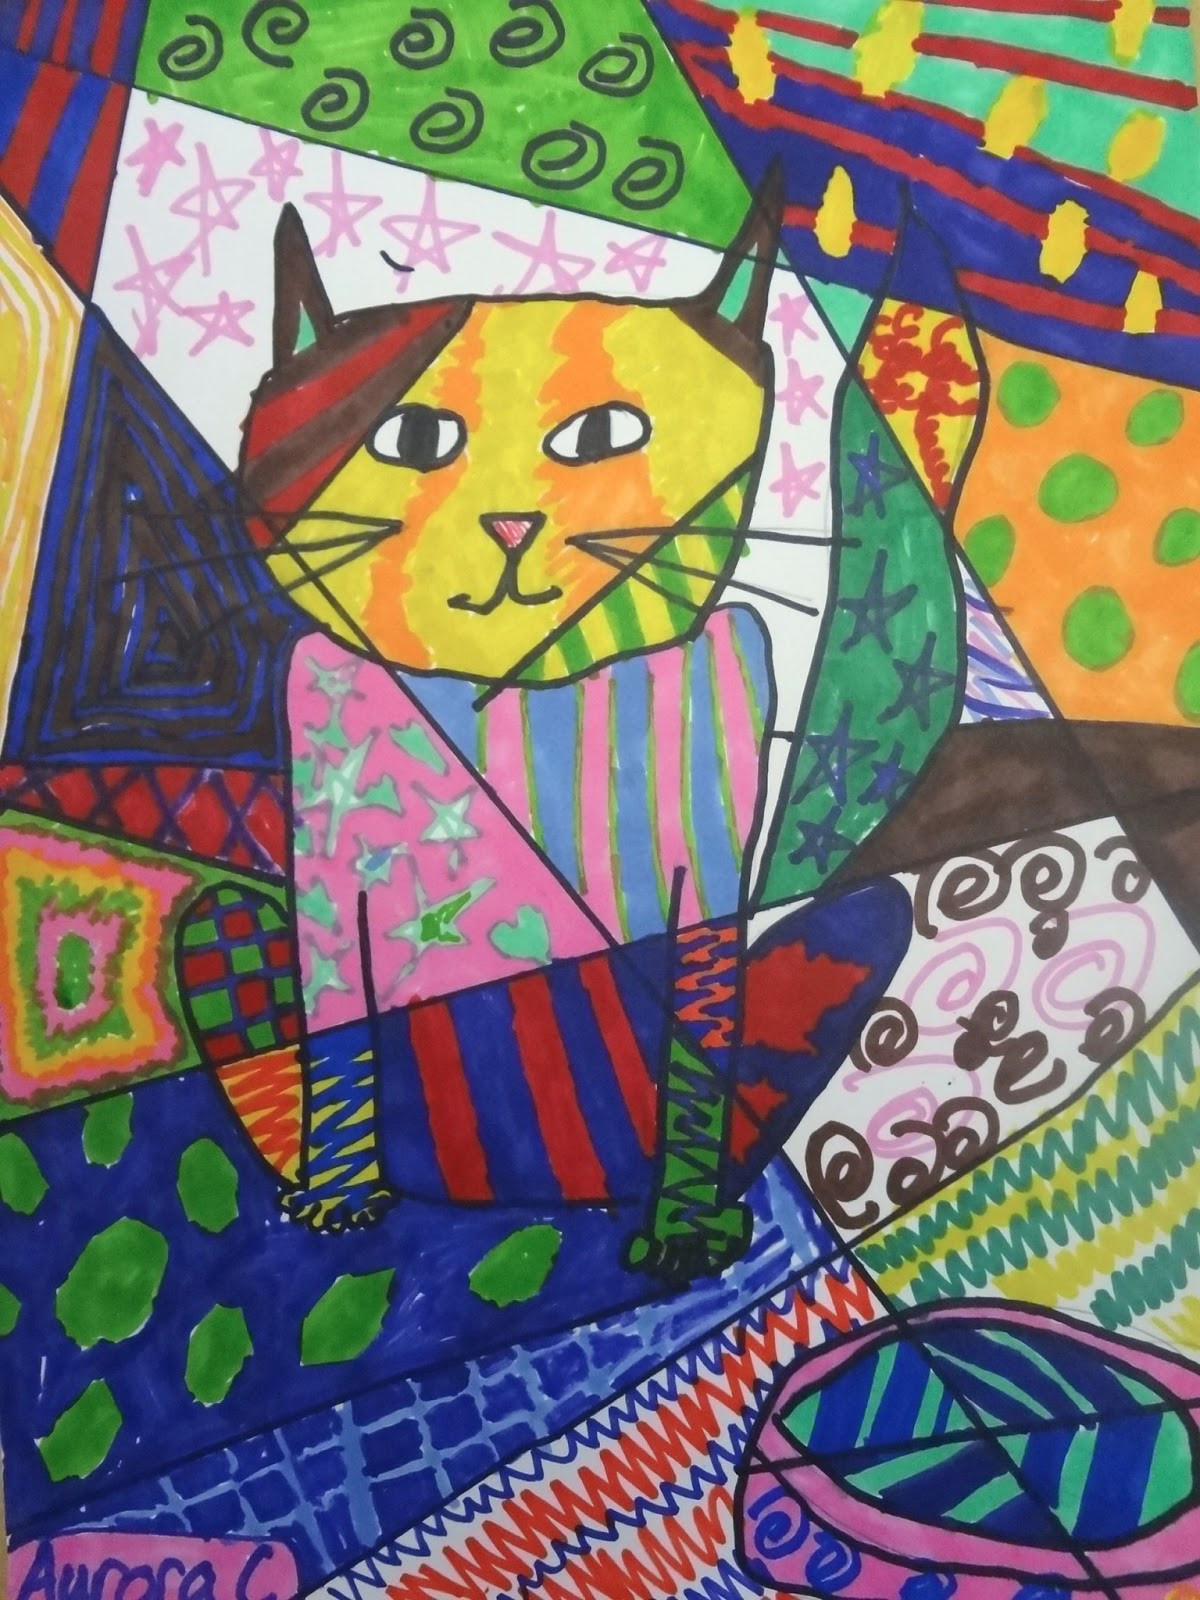 Fun Art Projects For Kids
 The Talking Walls Romero Britto Art Lesson for Kids